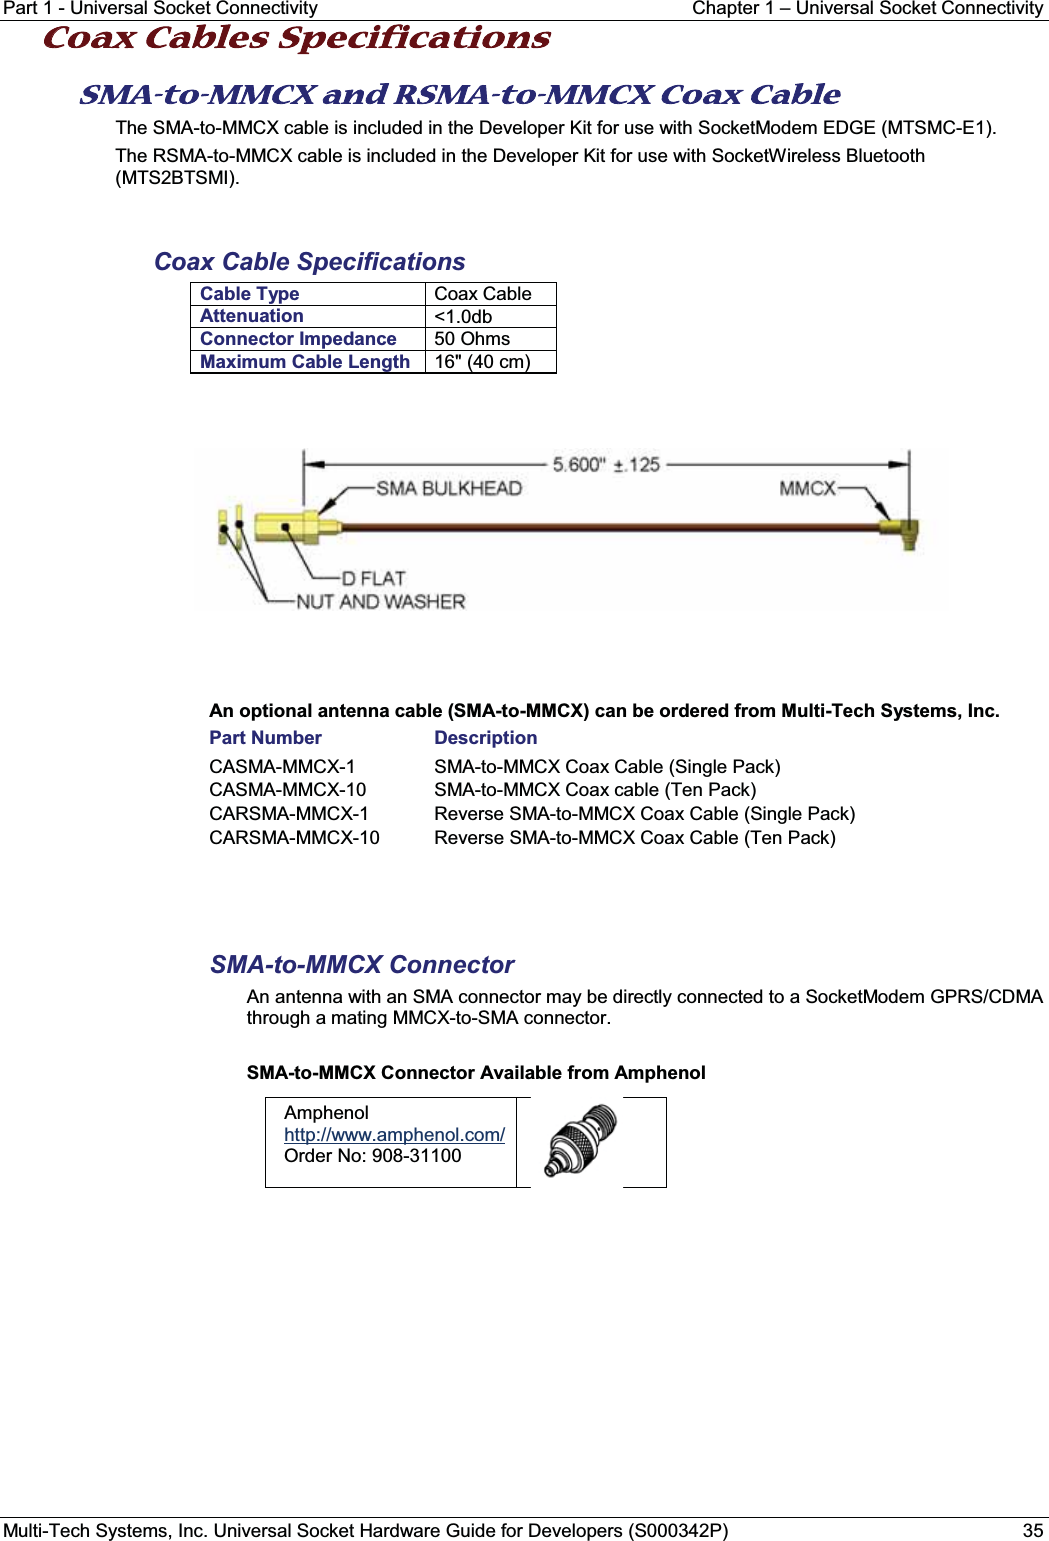 Part 1 - Universal Socket Connectivity Chapter 1 – Universal Socket ConnectivityMulti-Tech Systems, Inc. Universal Socket Hardware Guide for Developers (S000342P) 35CCoax Cables Specifications SMA-to-MMCX and RSMA-to-MMCX Coax Cable The SMA-to-MMCX cable is included in the Developer Kit for use with SocketModem EDGE (MTSMC-E1).The RSMA-to-MMCX cable is included in the Developer Kit for use with SocketWireless Bluetooth (MTS2BTSMI). Coax Cable SpecificationsCable Type Coax CableAttenuation &lt;1.0dbConnector Impedance 50 OhmsMaximum Cable Length 16&quot; (40 cm)An optional antenna cable (SMA-to-MMCX) can be ordered from Multi-Tech Systems, Inc. Part Number DescriptionCASMA-MMCX-1 SMA-to-MMCX Coax Cable (Single Pack)CASMA-MMCX-10 SMA-to-MMCX Coax cable (Ten Pack)CARSMA-MMCX-1 Reverse SMA-to-MMCX Coax Cable (Single Pack)CARSMA-MMCX-10 Reverse SMA-to-MMCX Coax Cable (Ten Pack)SMA-to-MMCX Connector An antenna with an SMA connector may be directly connected to a SocketModem GPRS/CDMA through a mating MMCX-to-SMA connector.SMA-to-MMCX Connector Available from AmphenolAmphenol http://www.amphenol.com/Order No: 908-31100